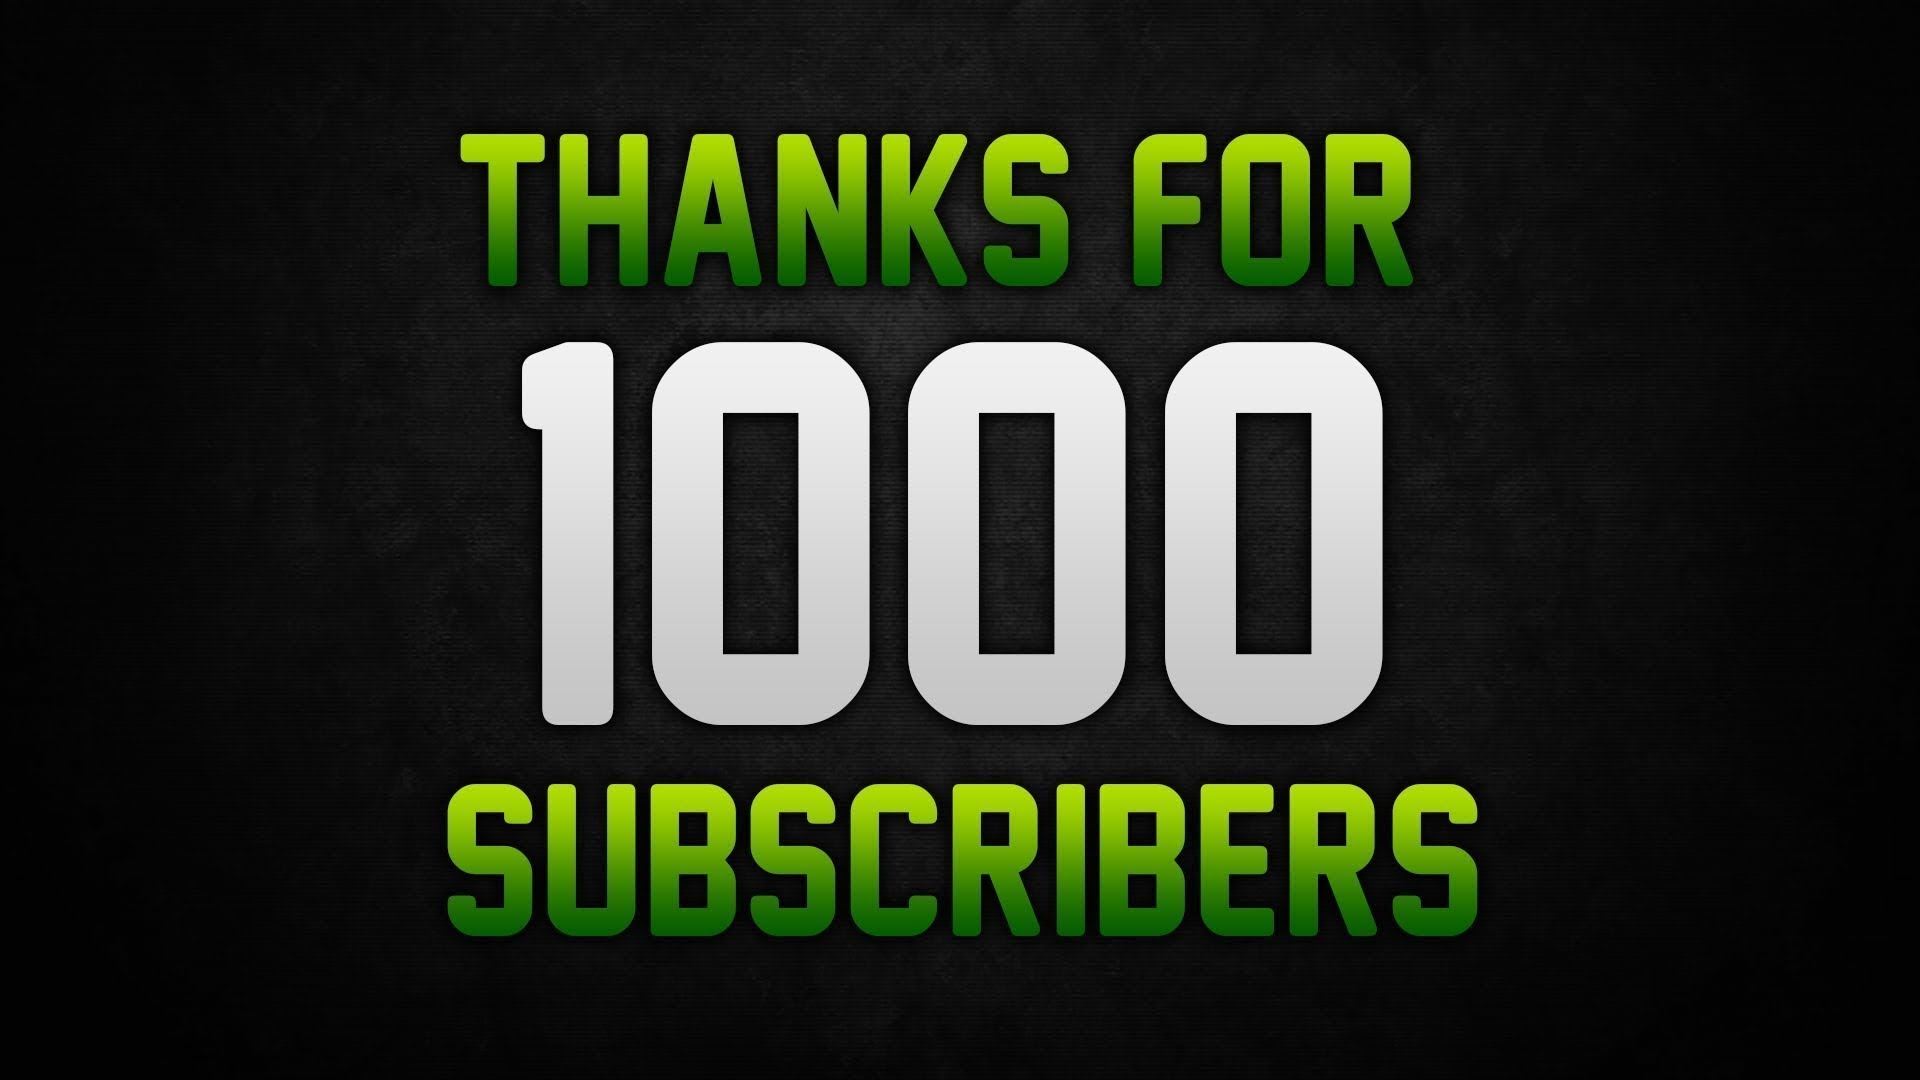 Youtube thank. 1000 Subscribers. Subscribe 1000. Thanks for 1000 subscribers. 1k subscribers.